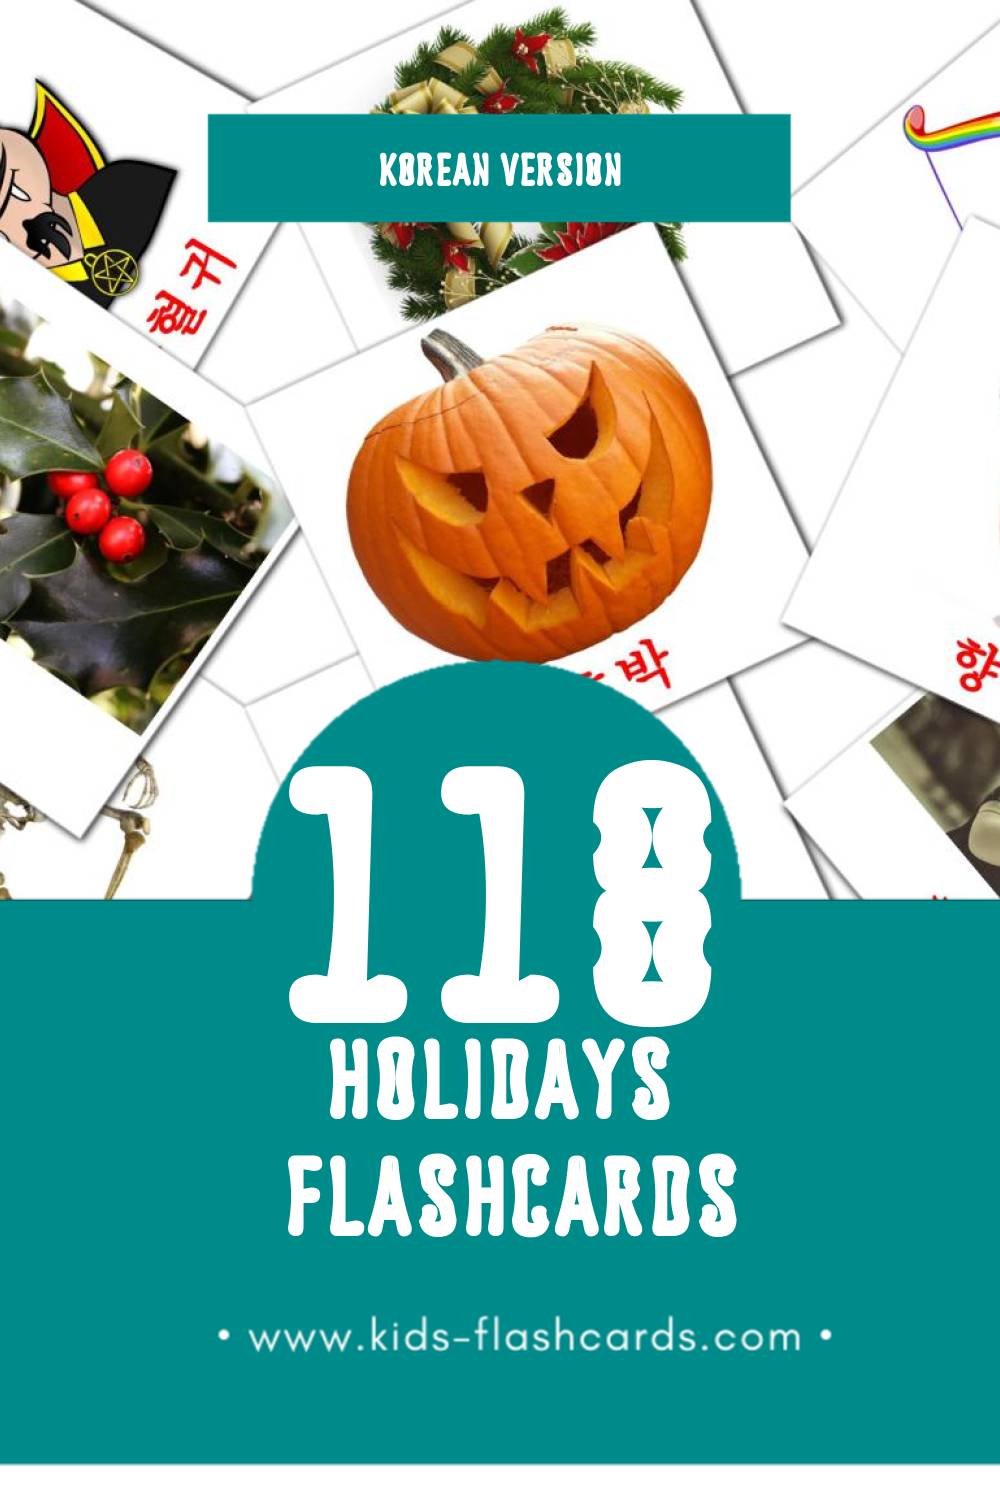 Visual 휴가 Flashcards for Toddlers (118 cards in Korean)